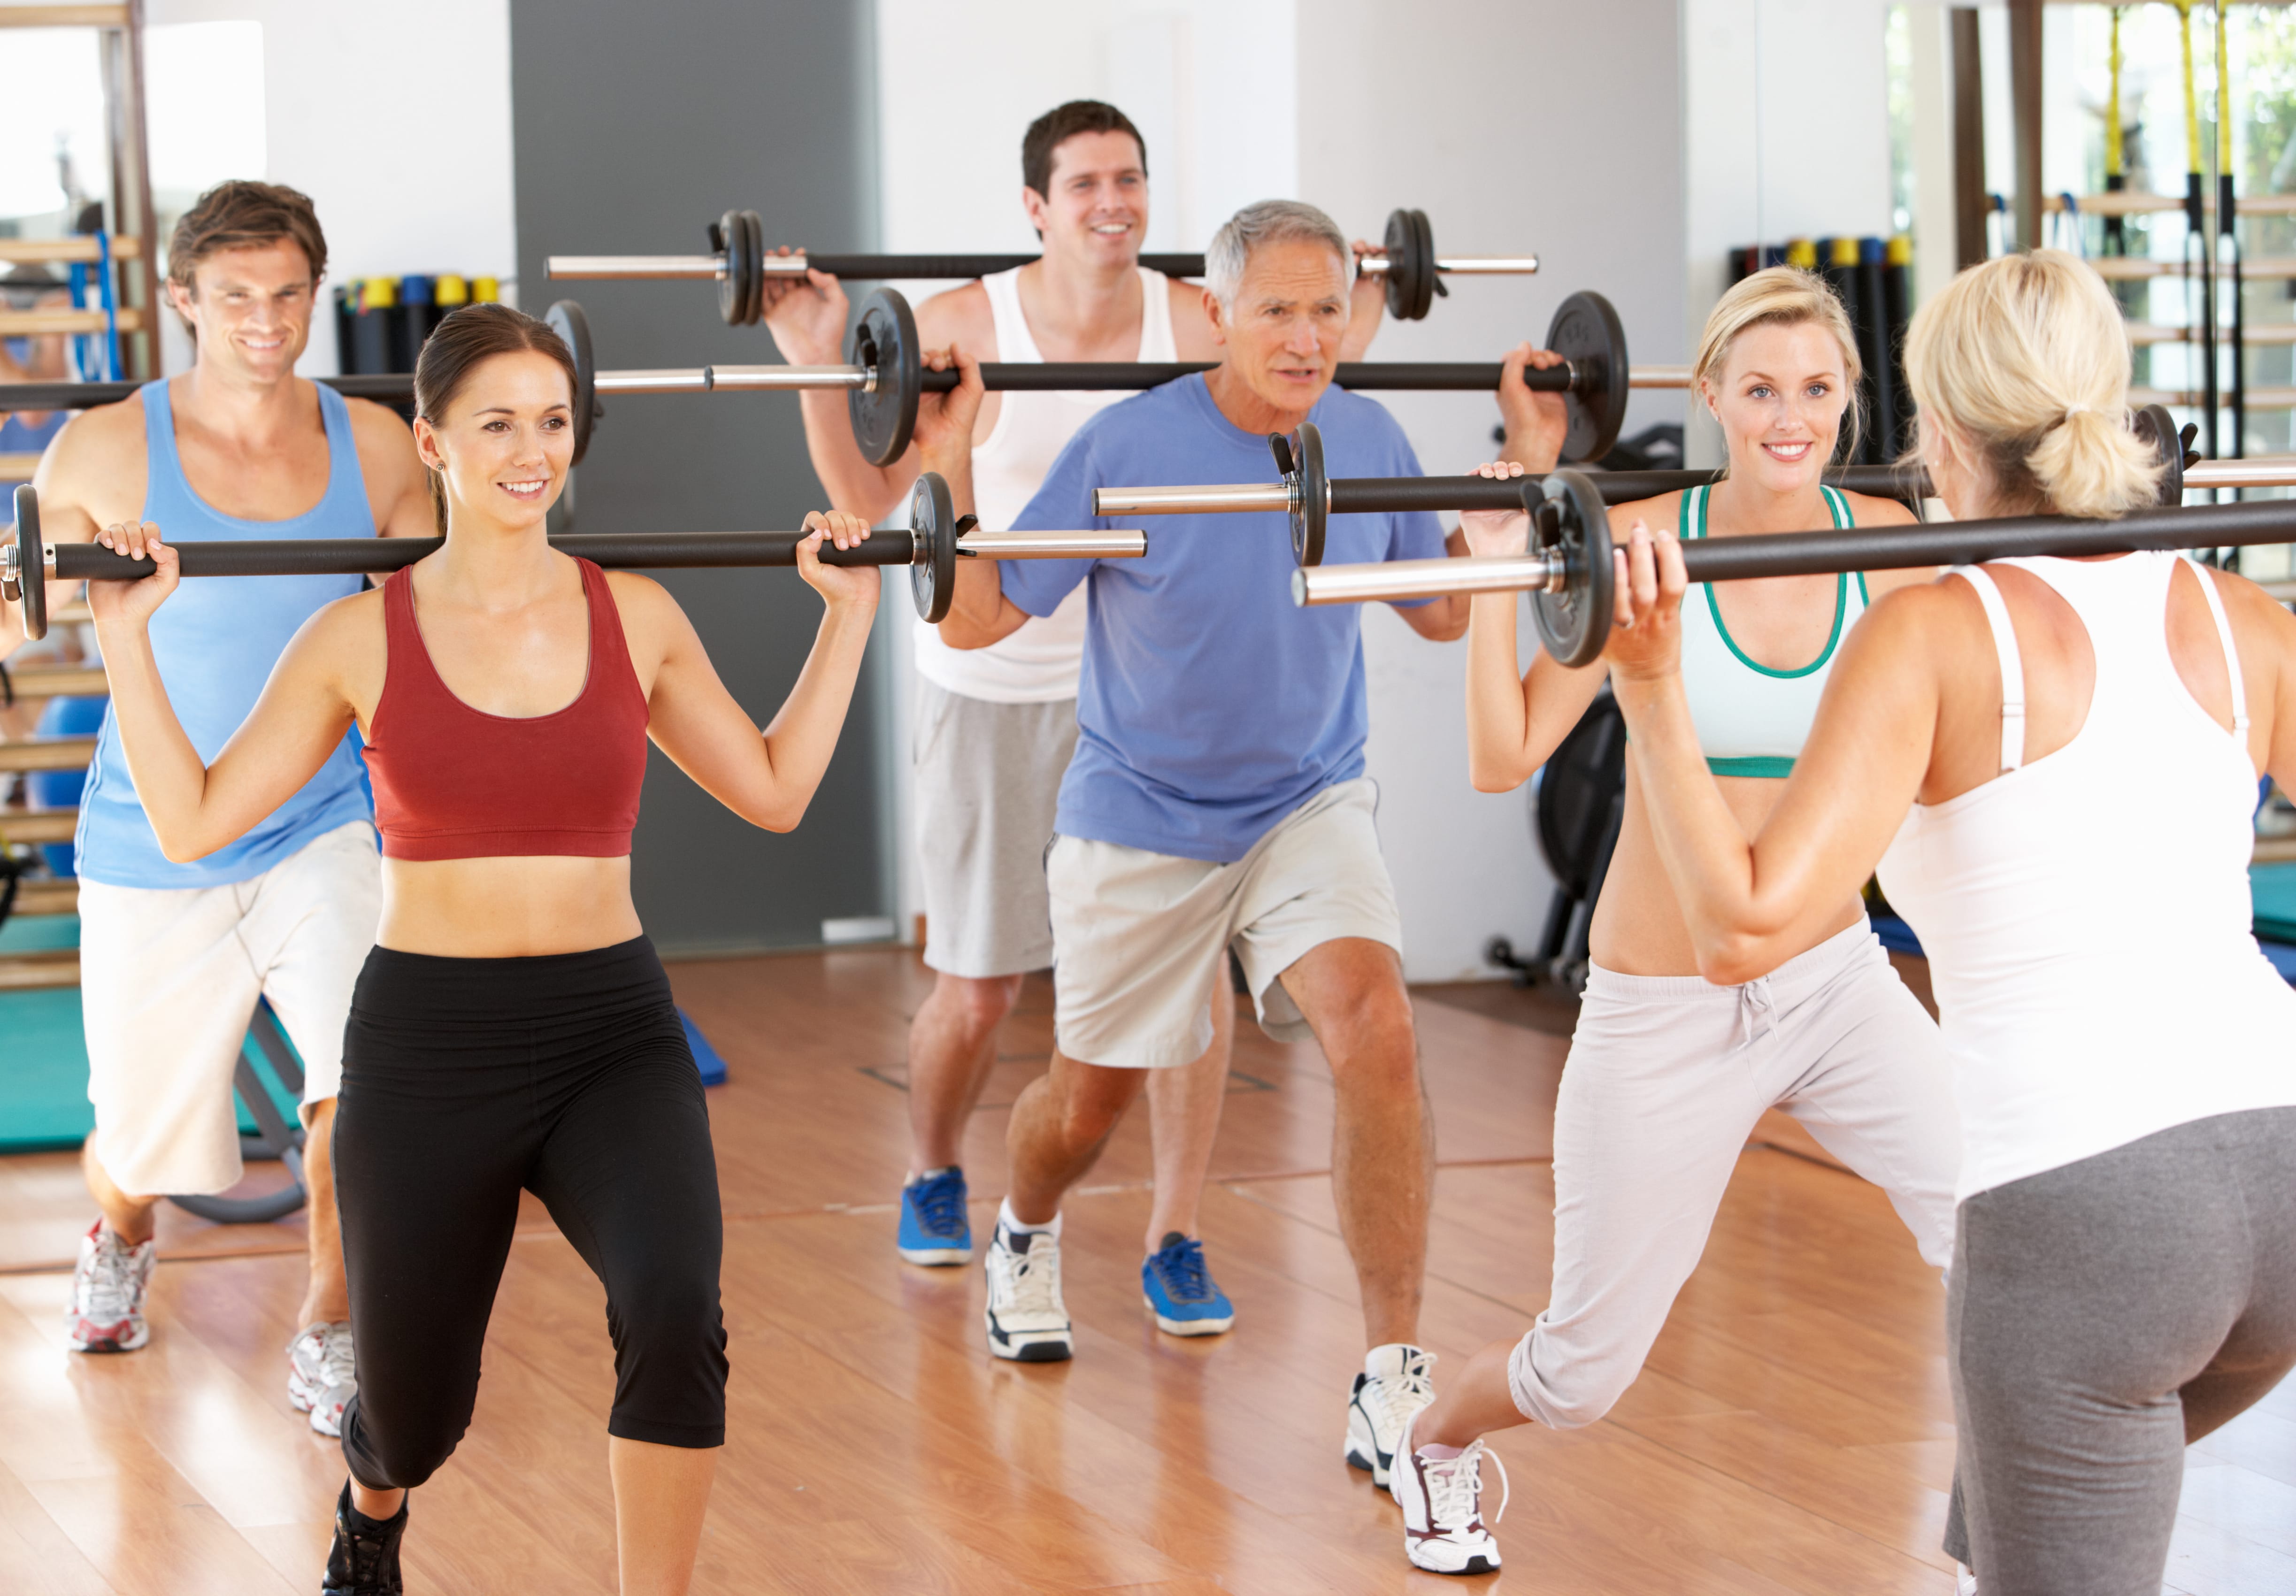  Join Our Group Fitness Classes at the Y